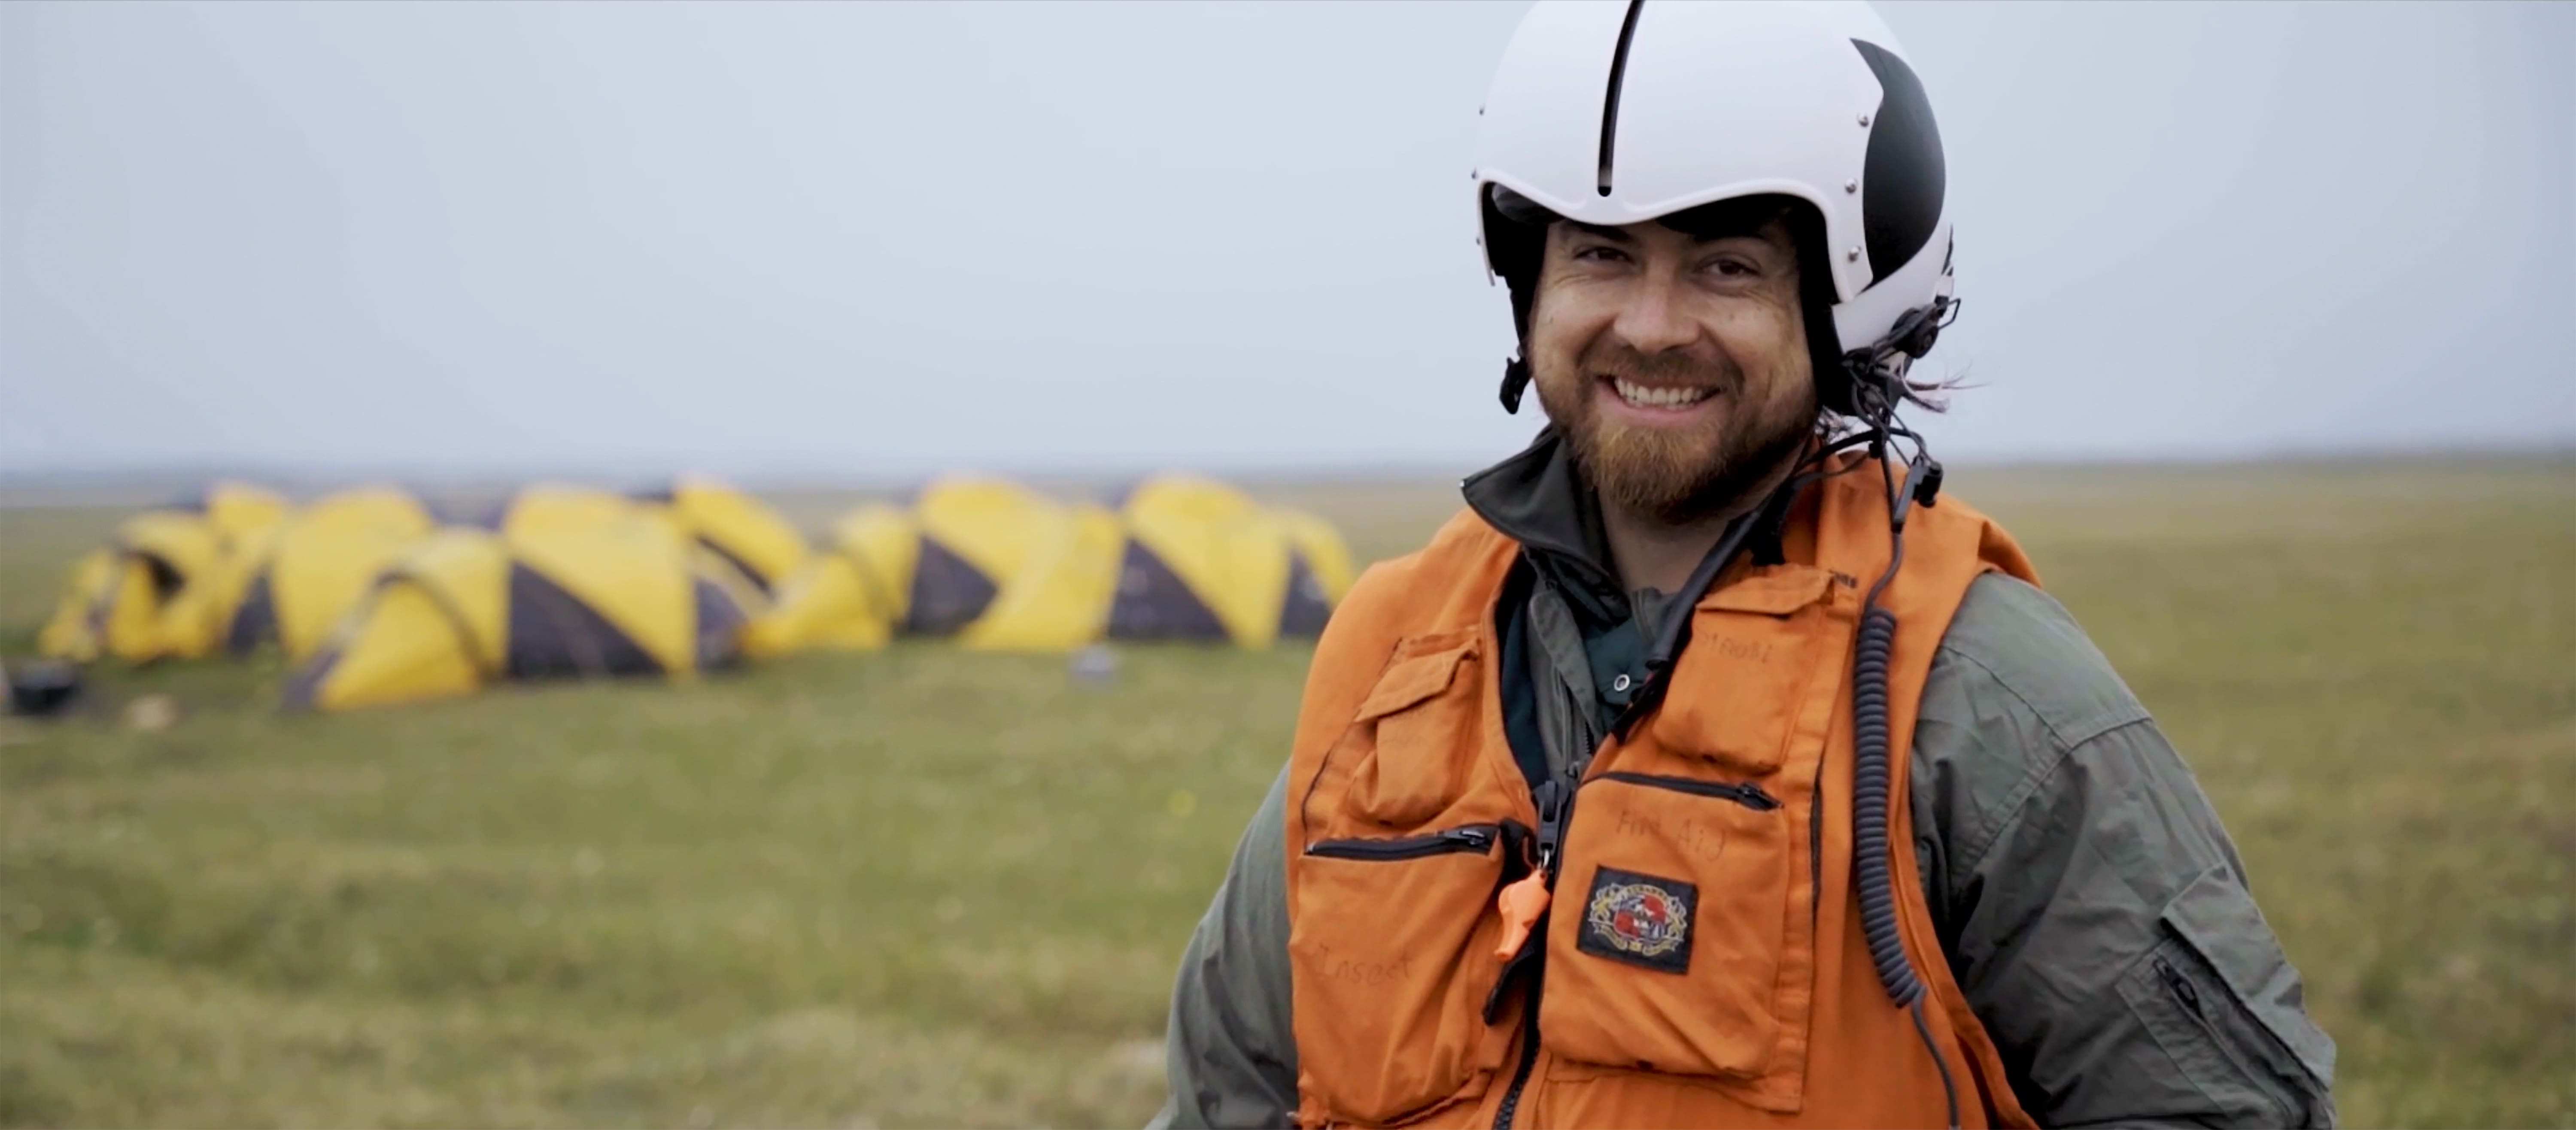 Artist Francis Vallejo is standing in an orange vest with a white helmet on his head in front of group of yellow tents in Alaska.